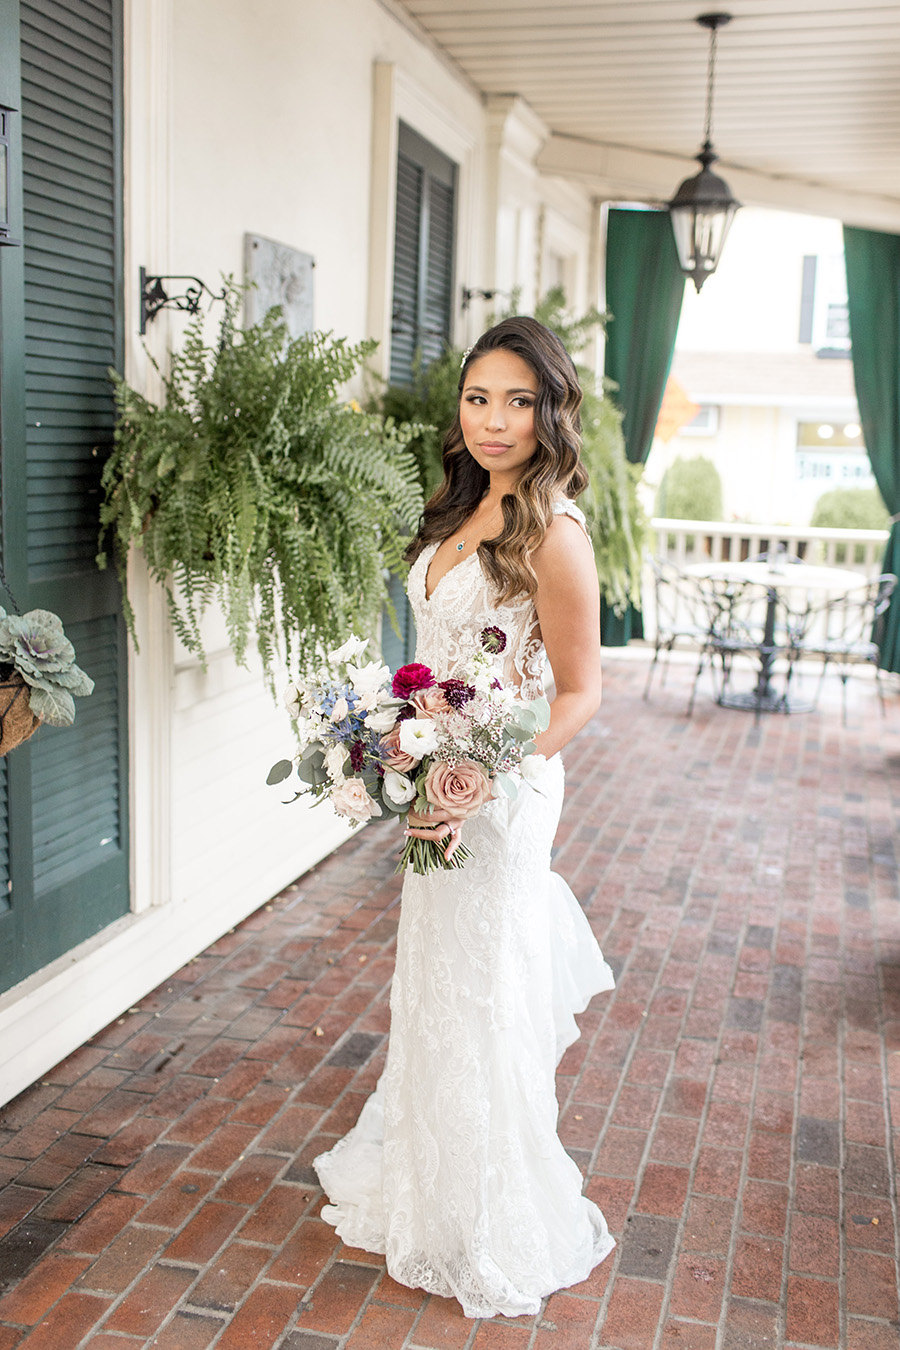 Bride in lace wedding gown with hollywood waves